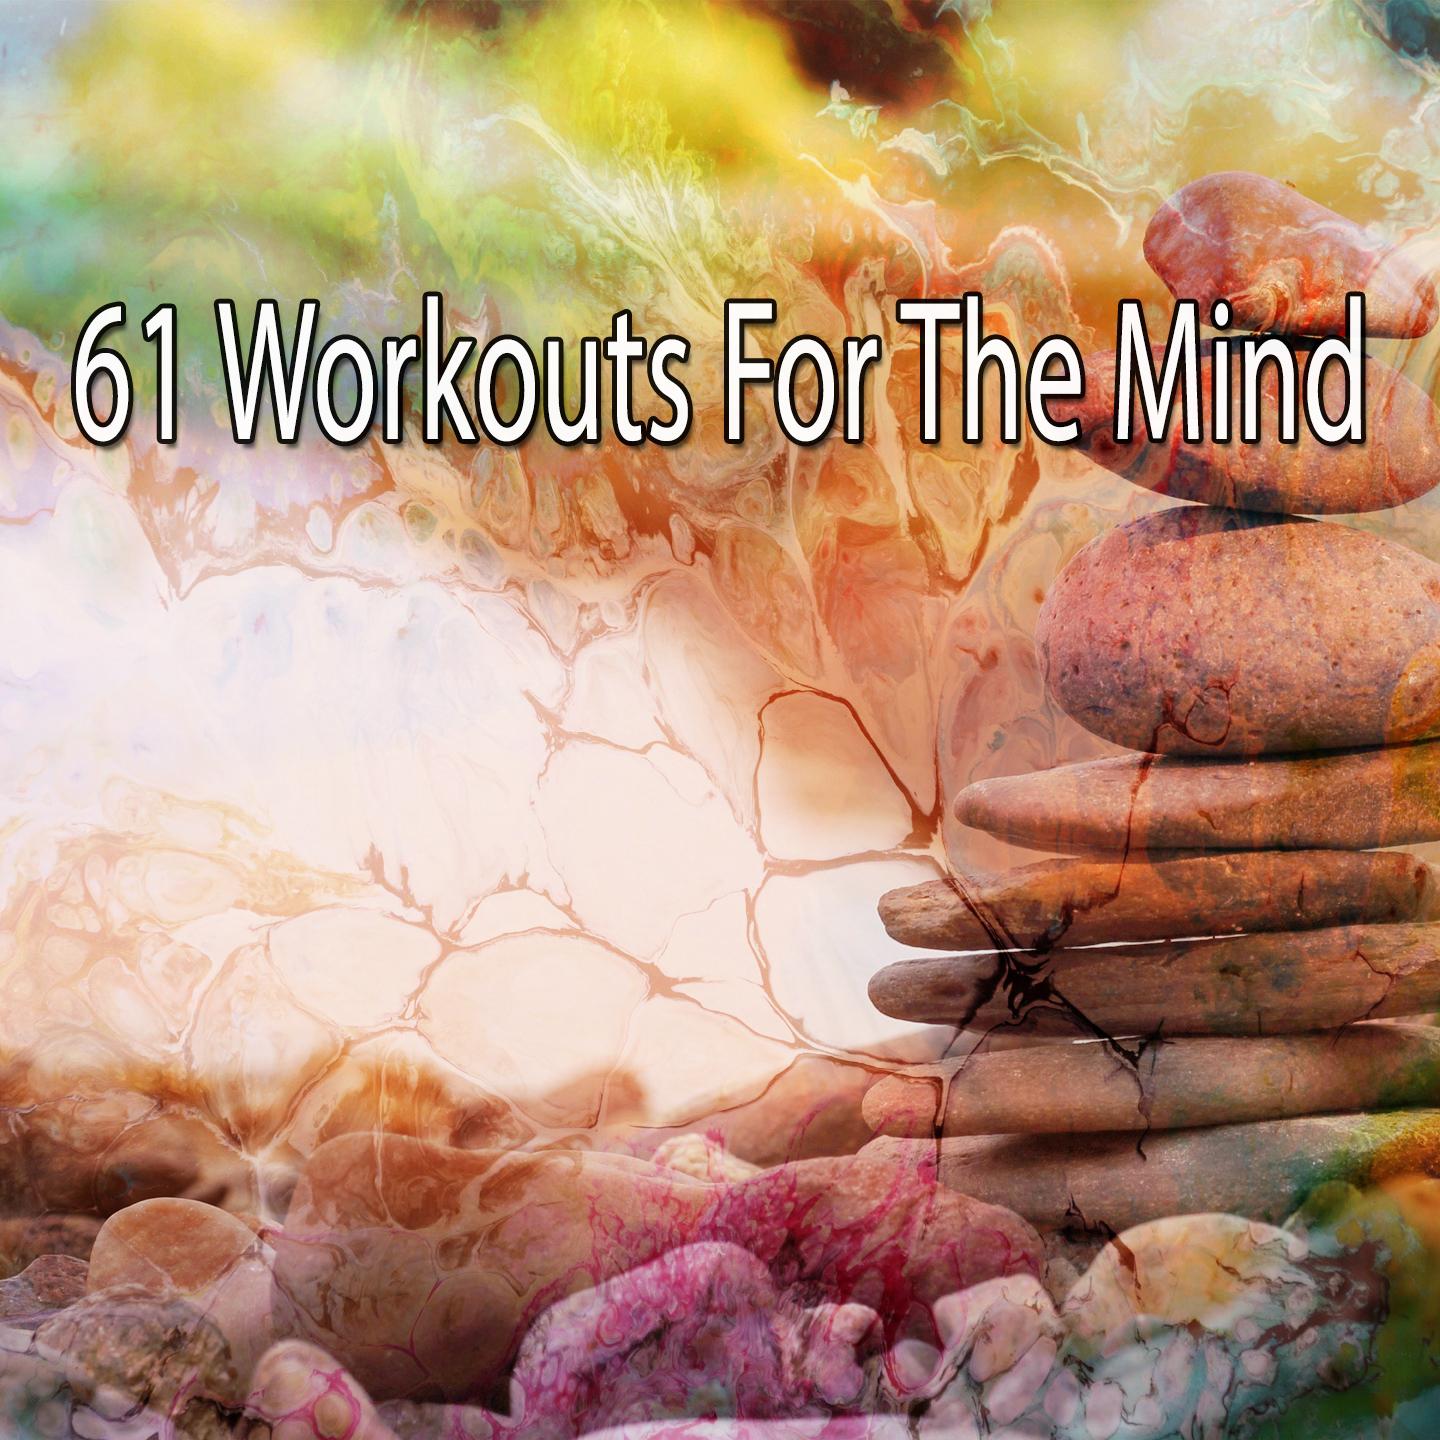 61 Workouts for the Mind